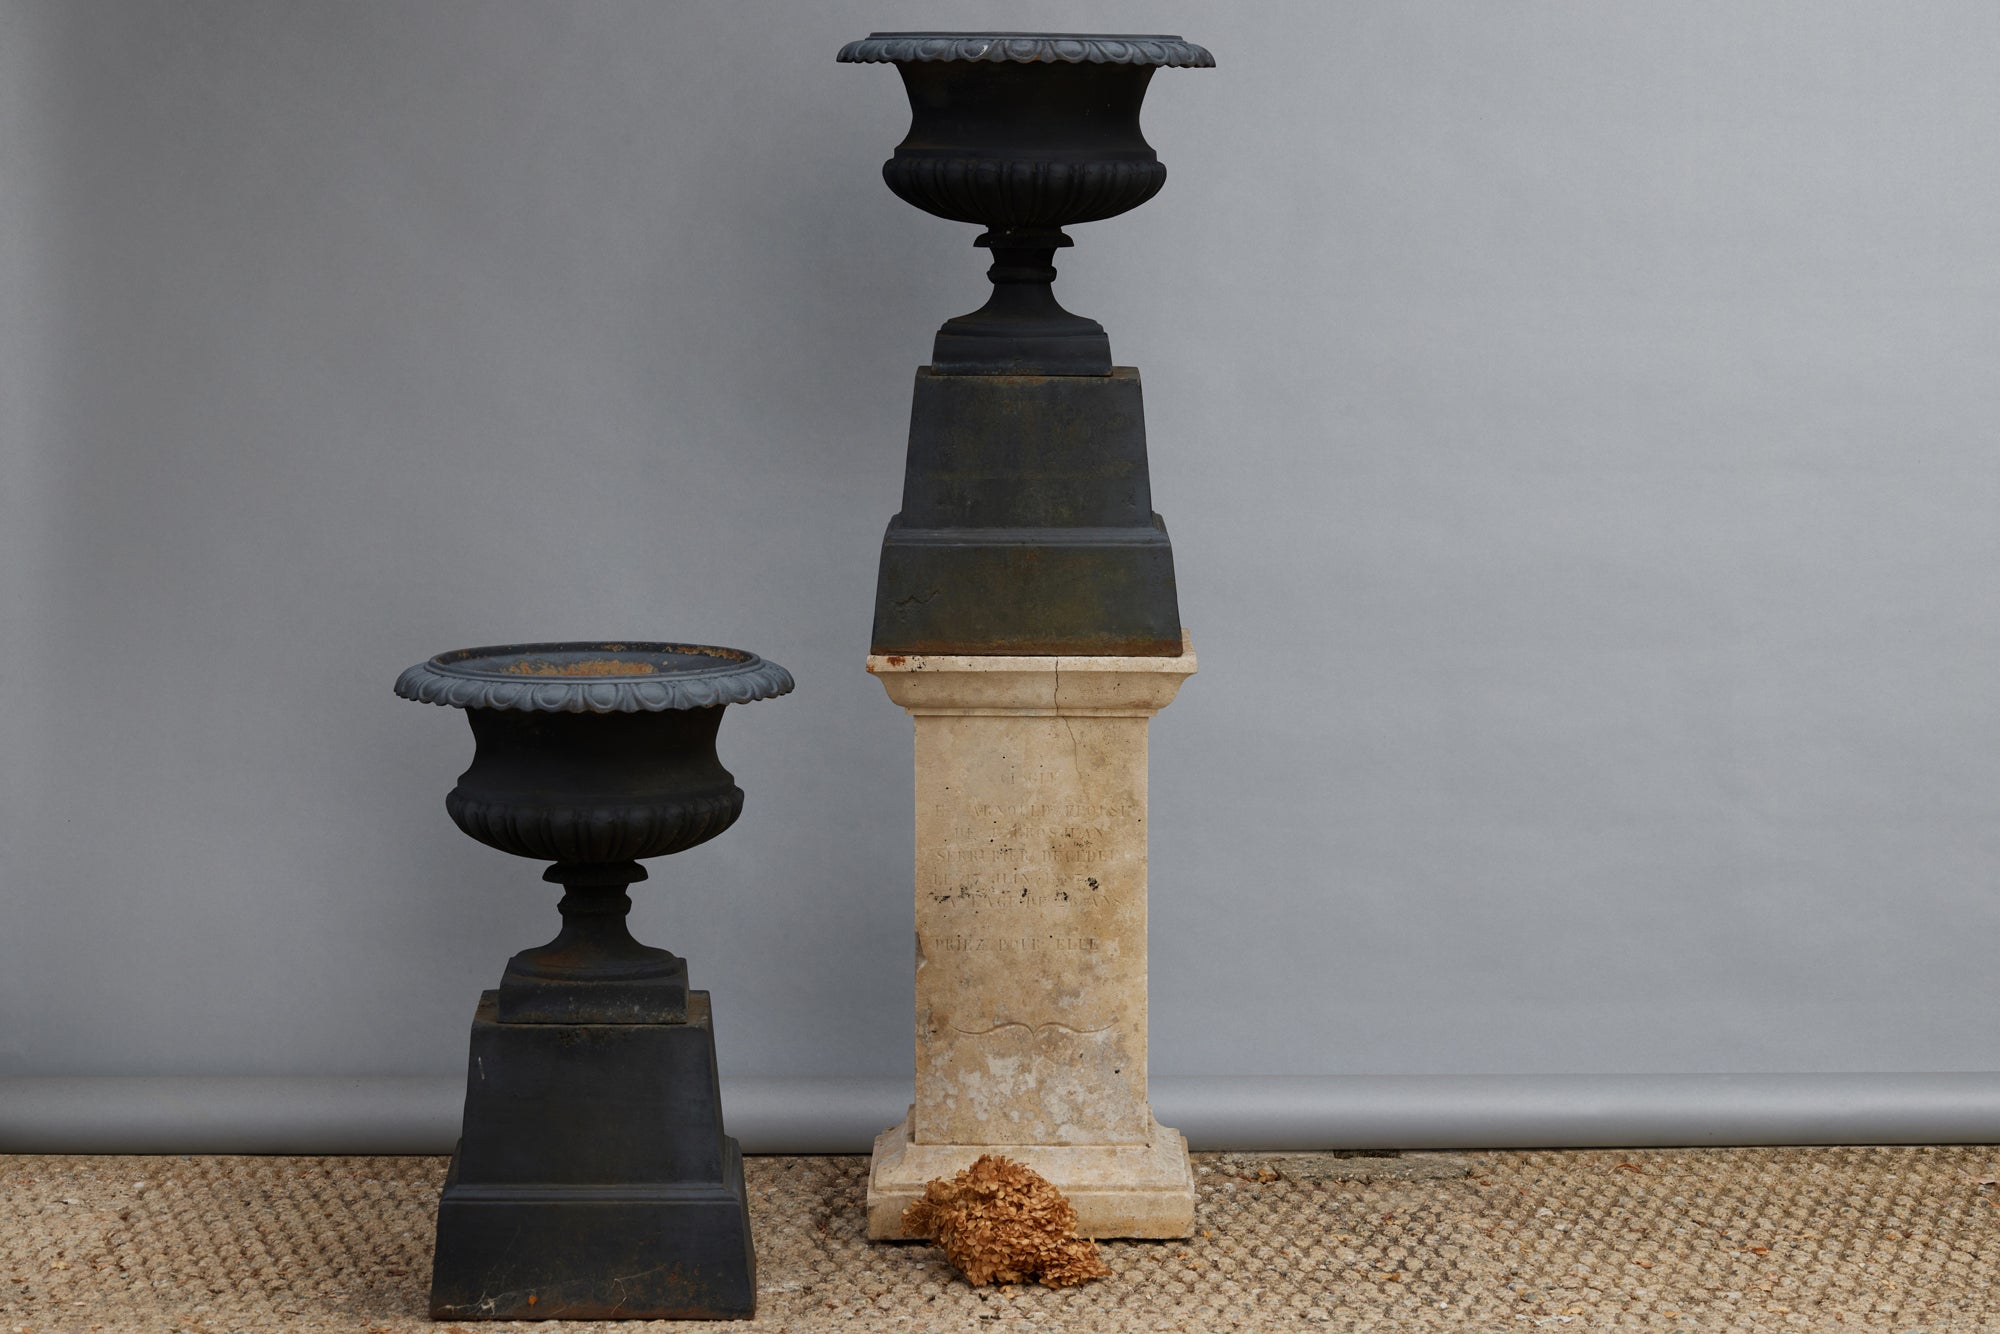 Pair of Cast Iron Urns on Stands